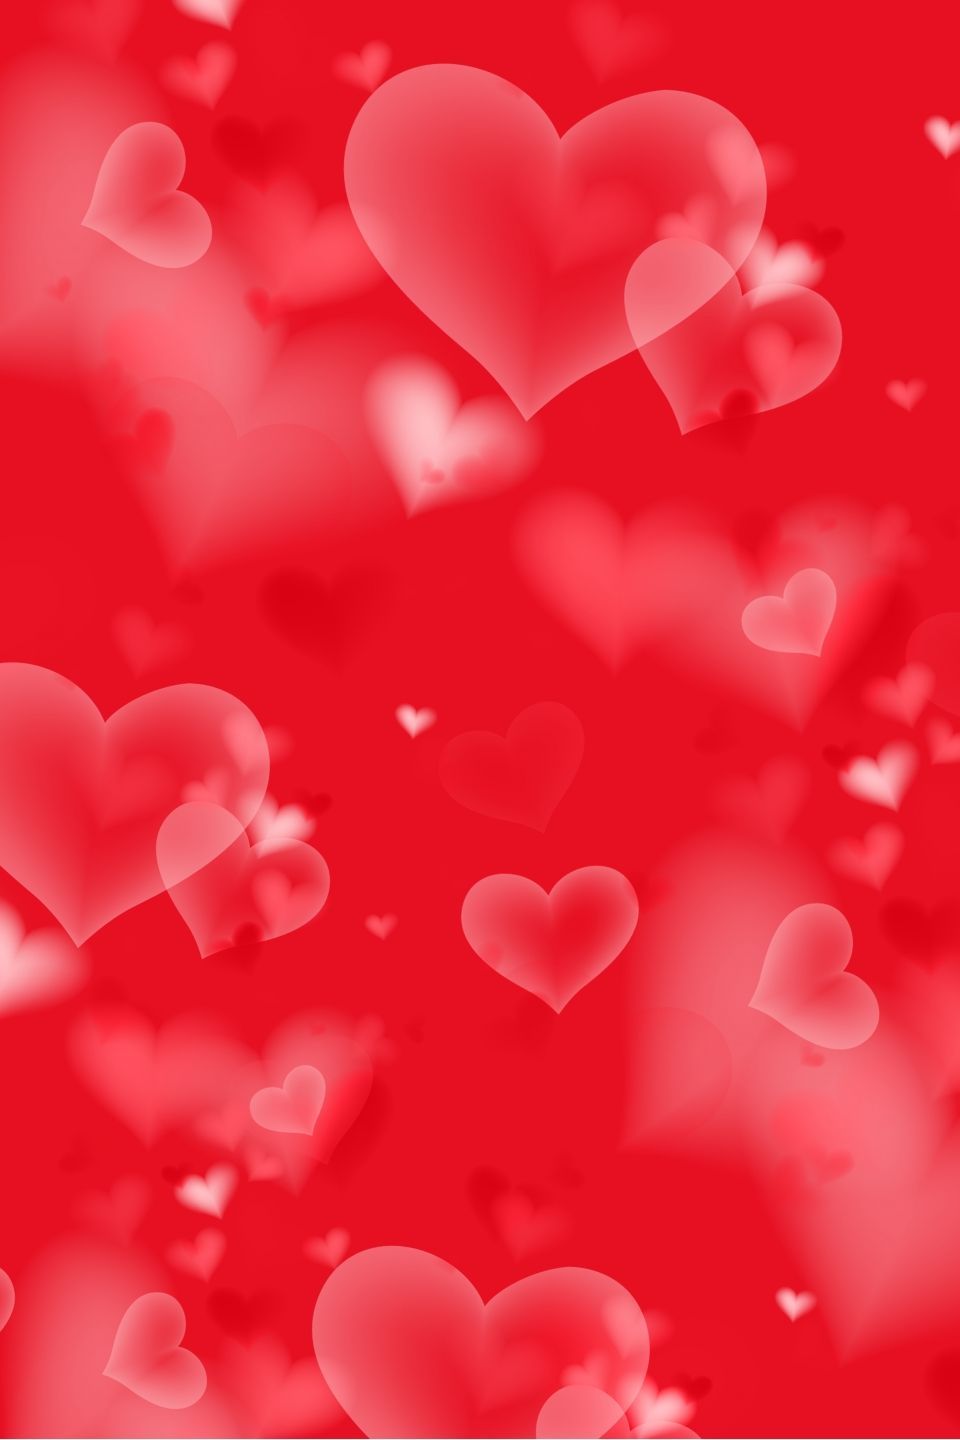 Romantic Valentine S Day Red Heart Shaped Pattern H5 Background Material. Valentine background, Y2k background, Photohoot backdrops